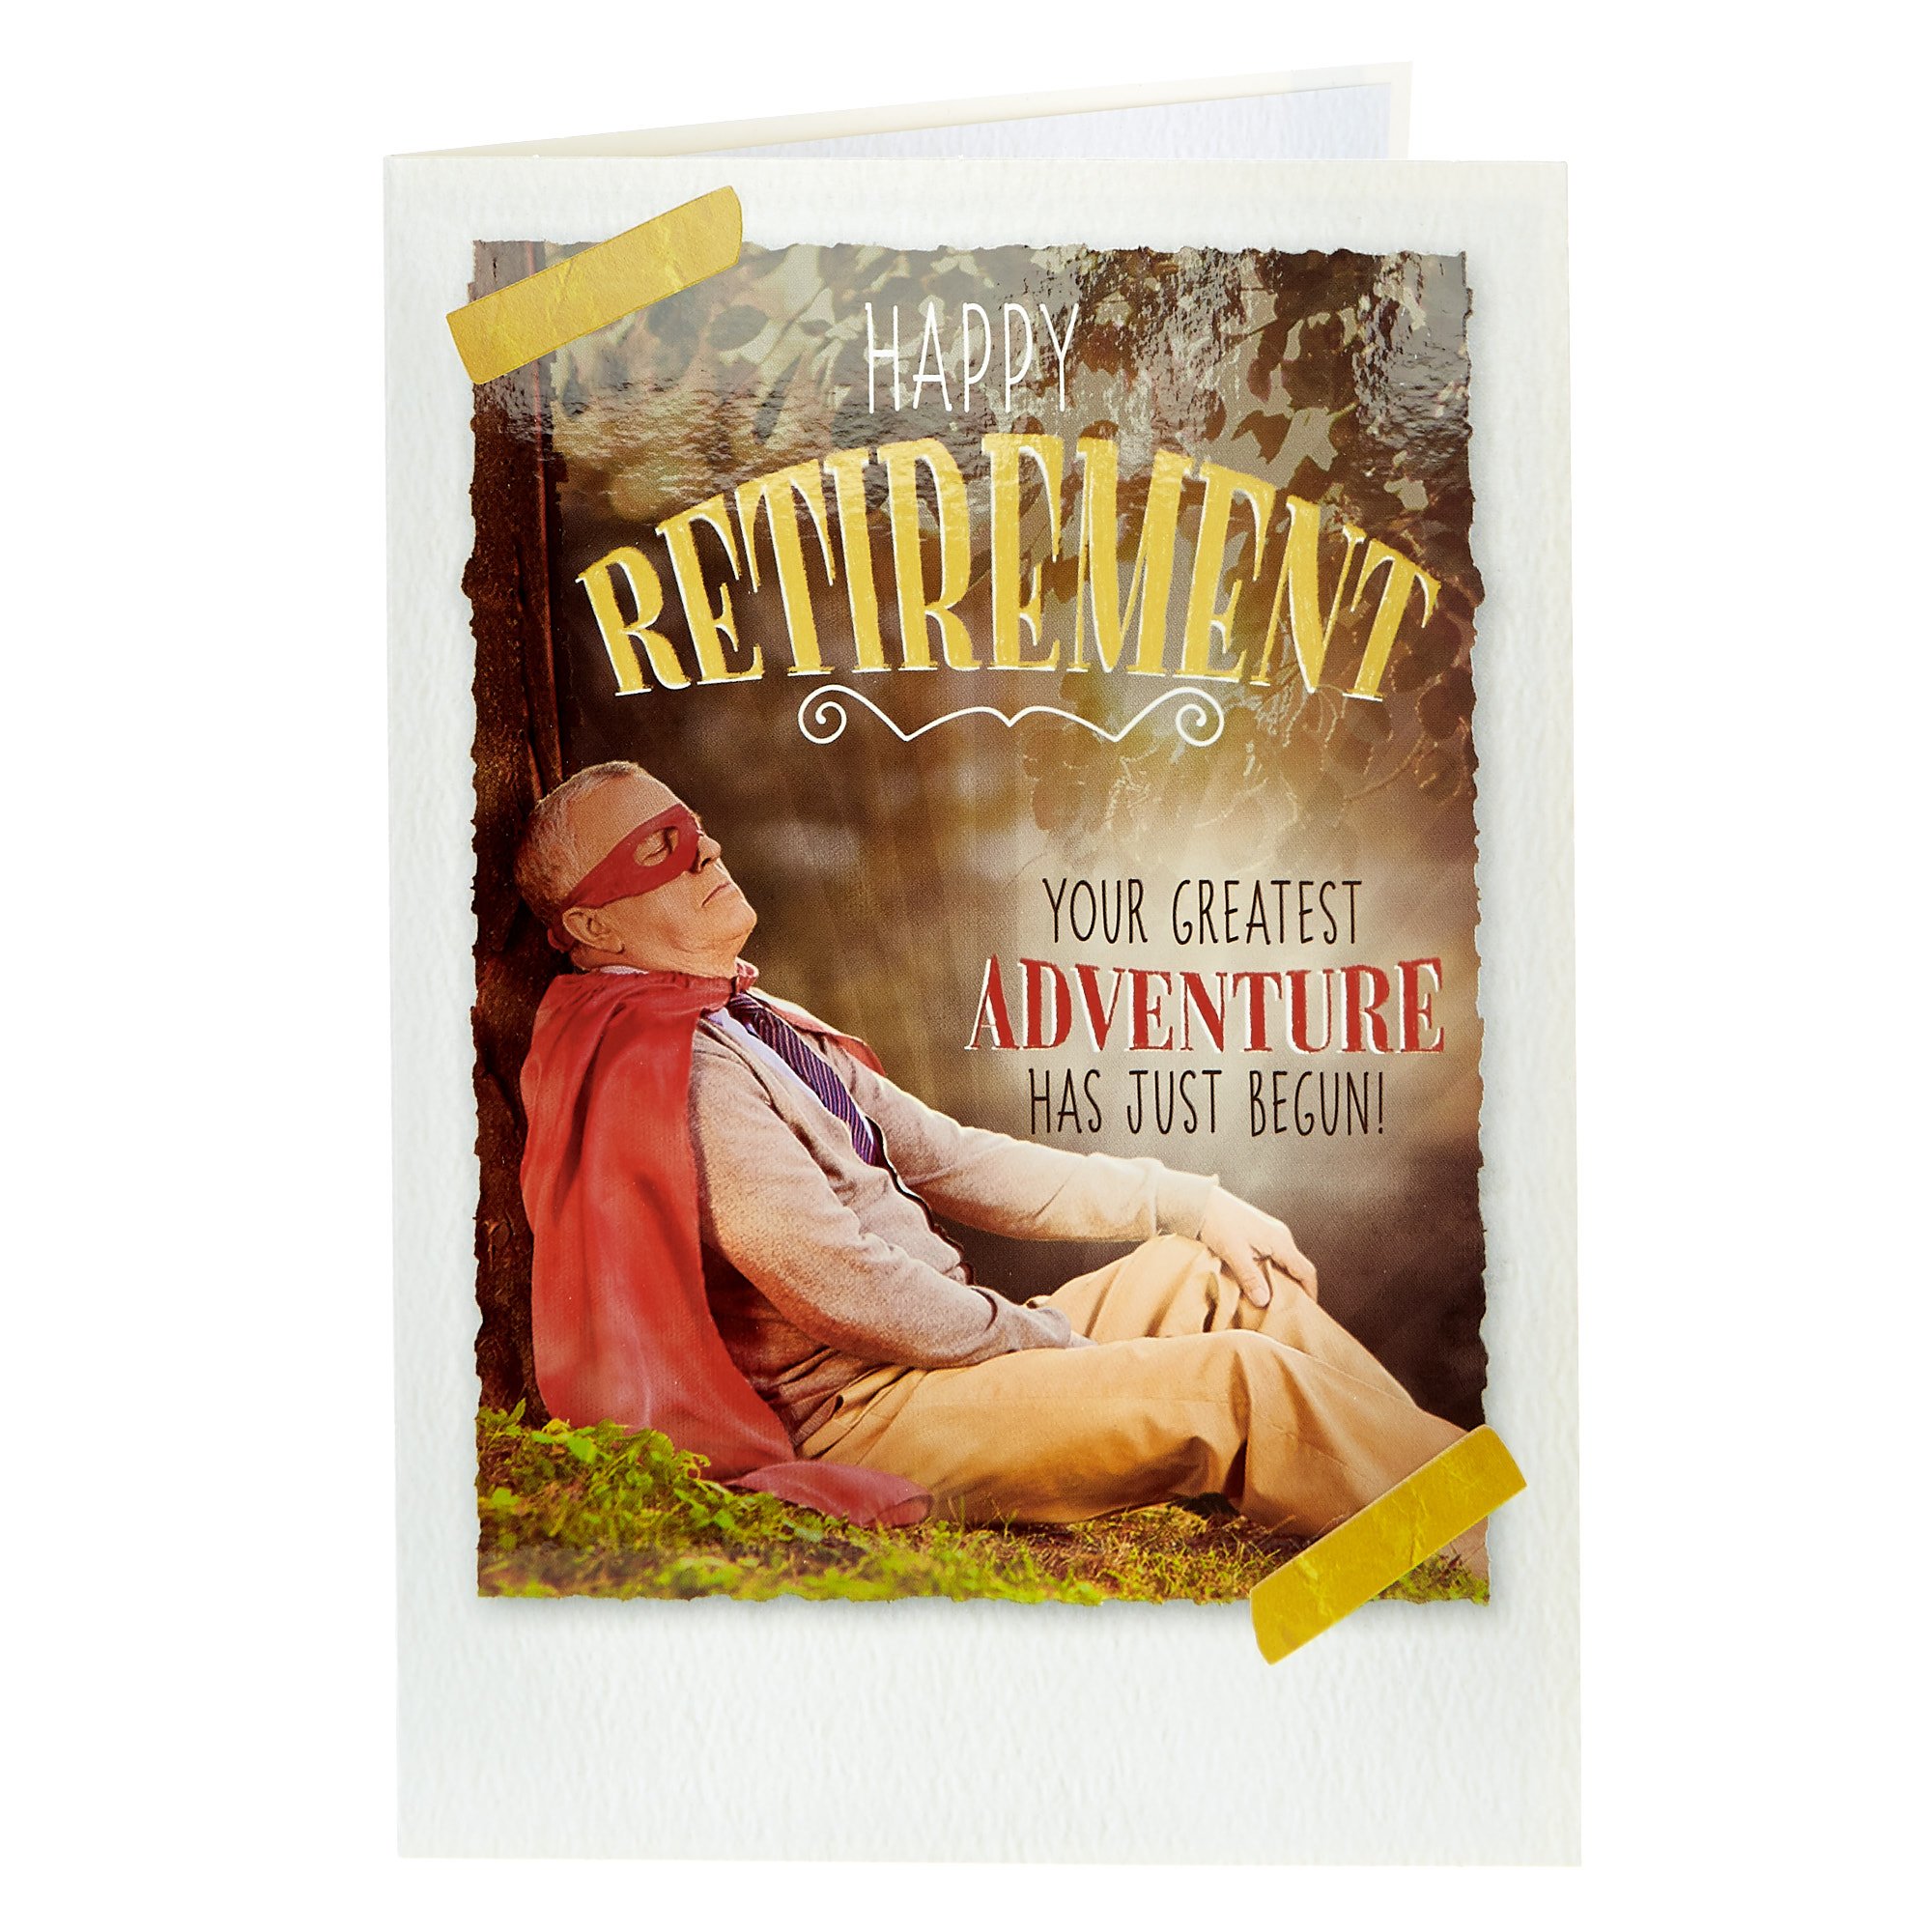 Retirement Card - Your Greatest Adventure